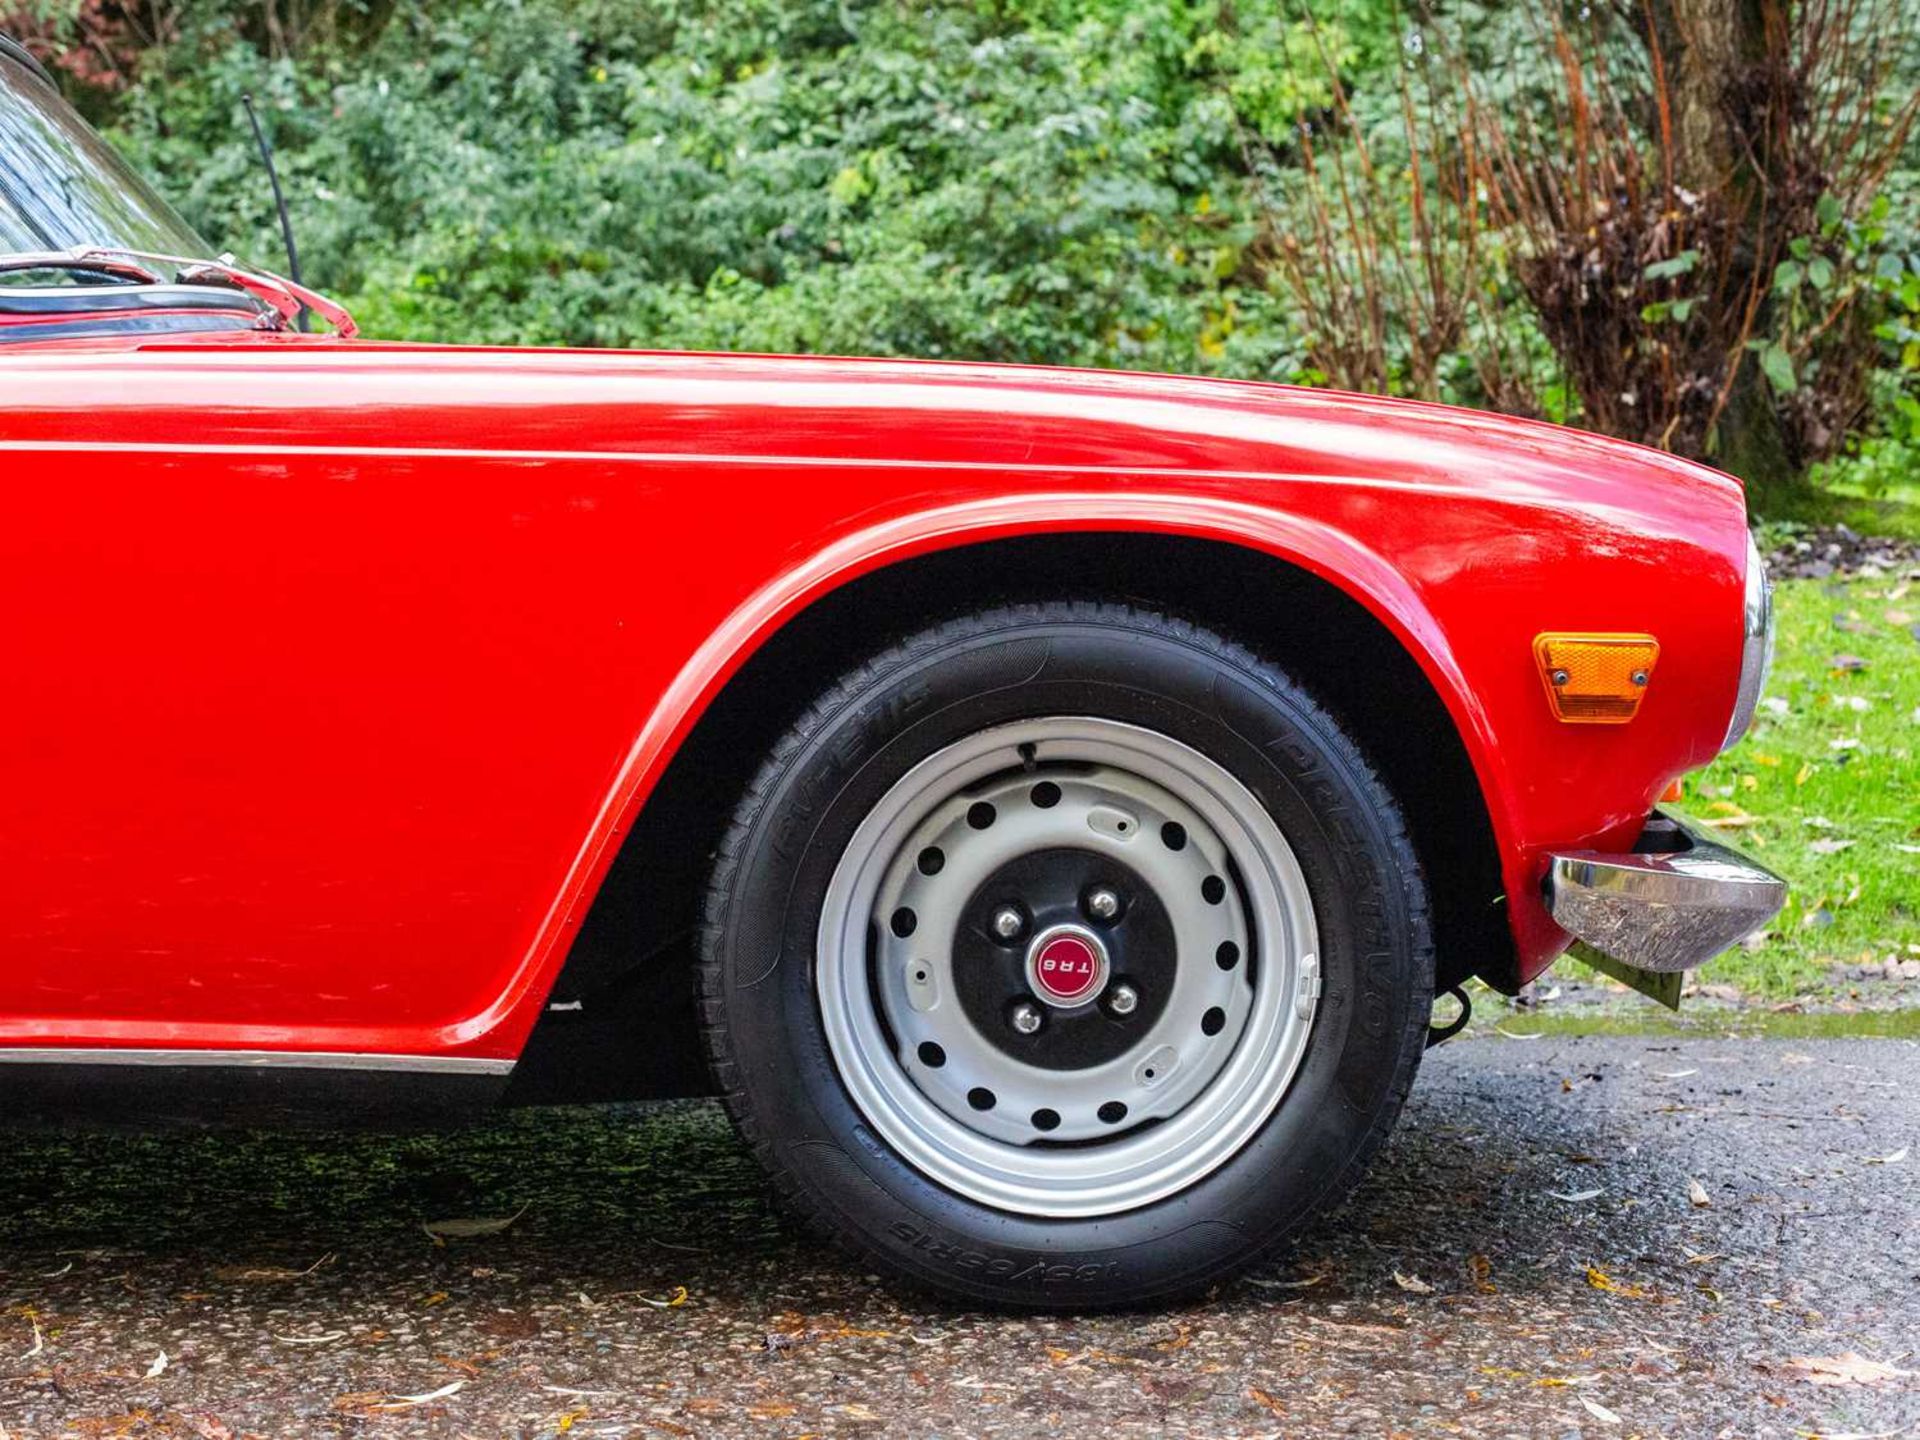 1969 Triumph TR6 Repatriated in 2020, converted to RHD and equipped with UK-specification SU carbure - Image 15 of 53